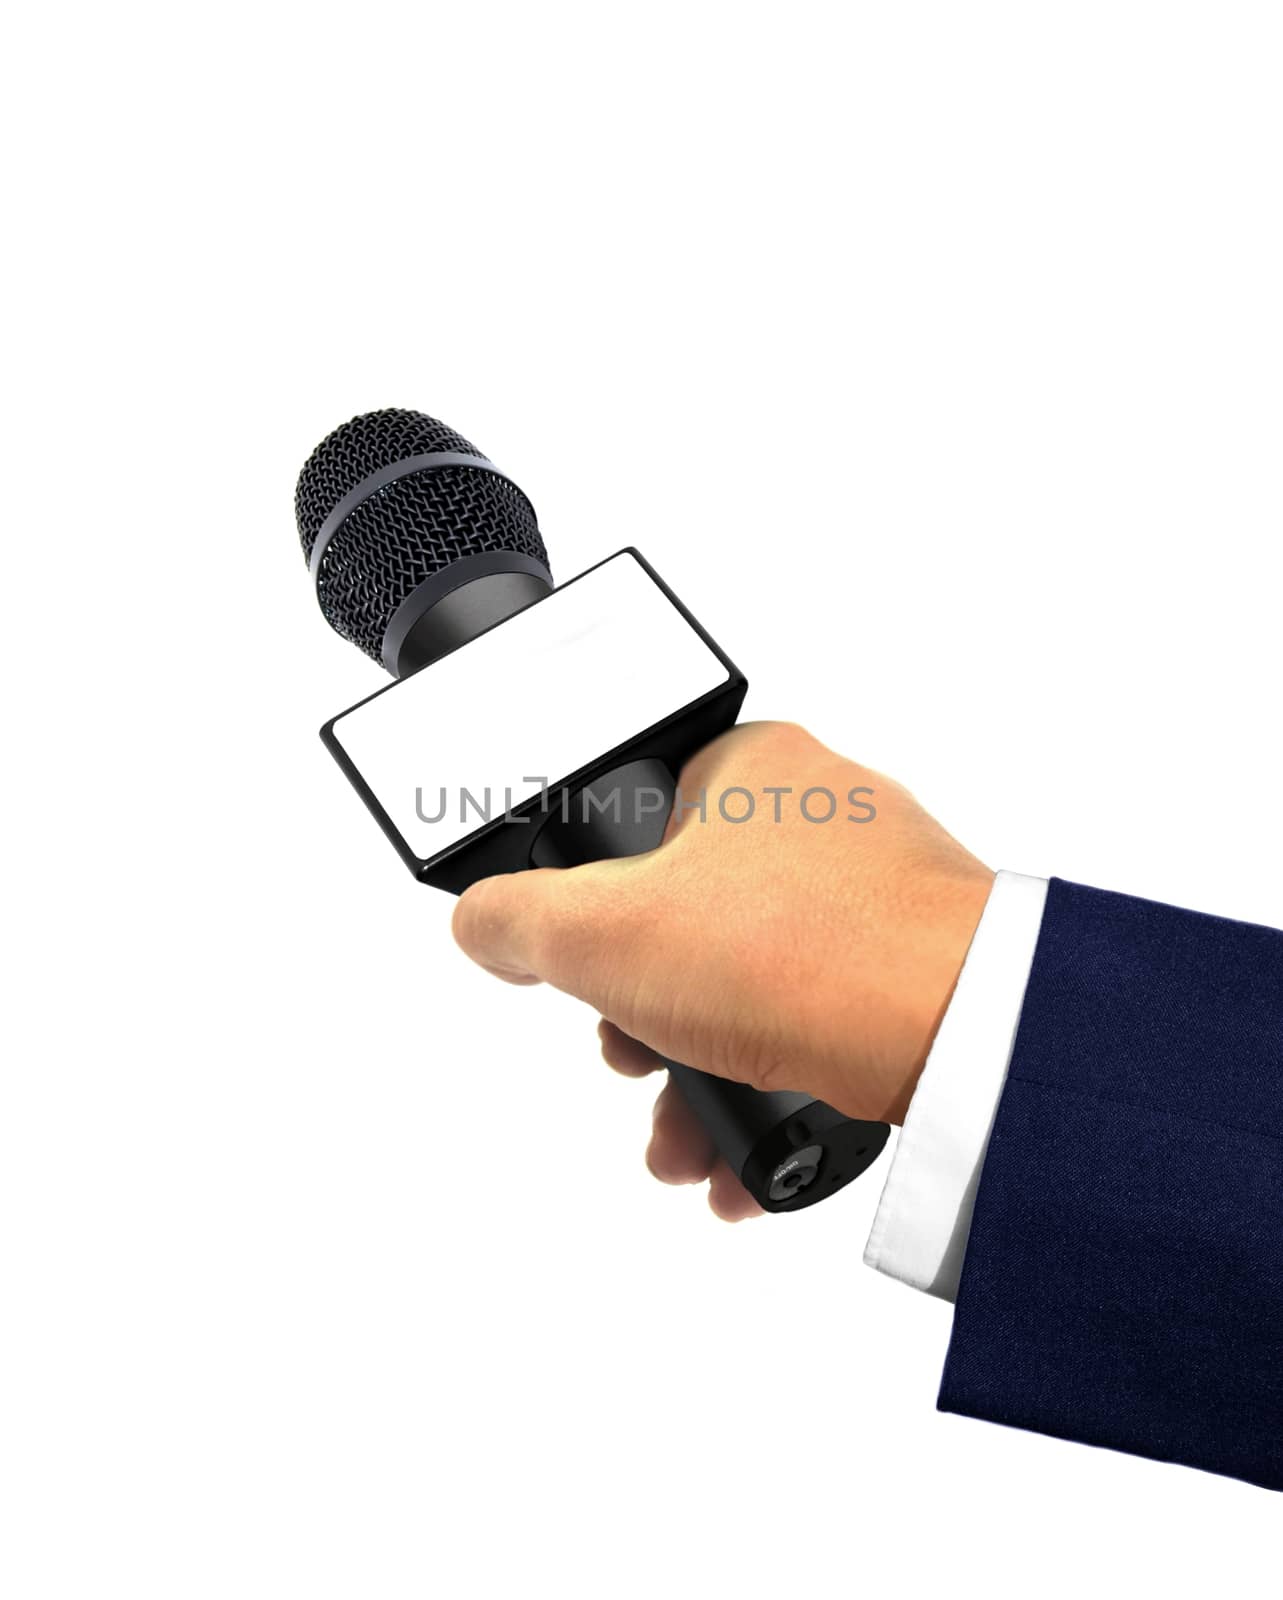 Hand Holding Microphone for Interview by razihusin